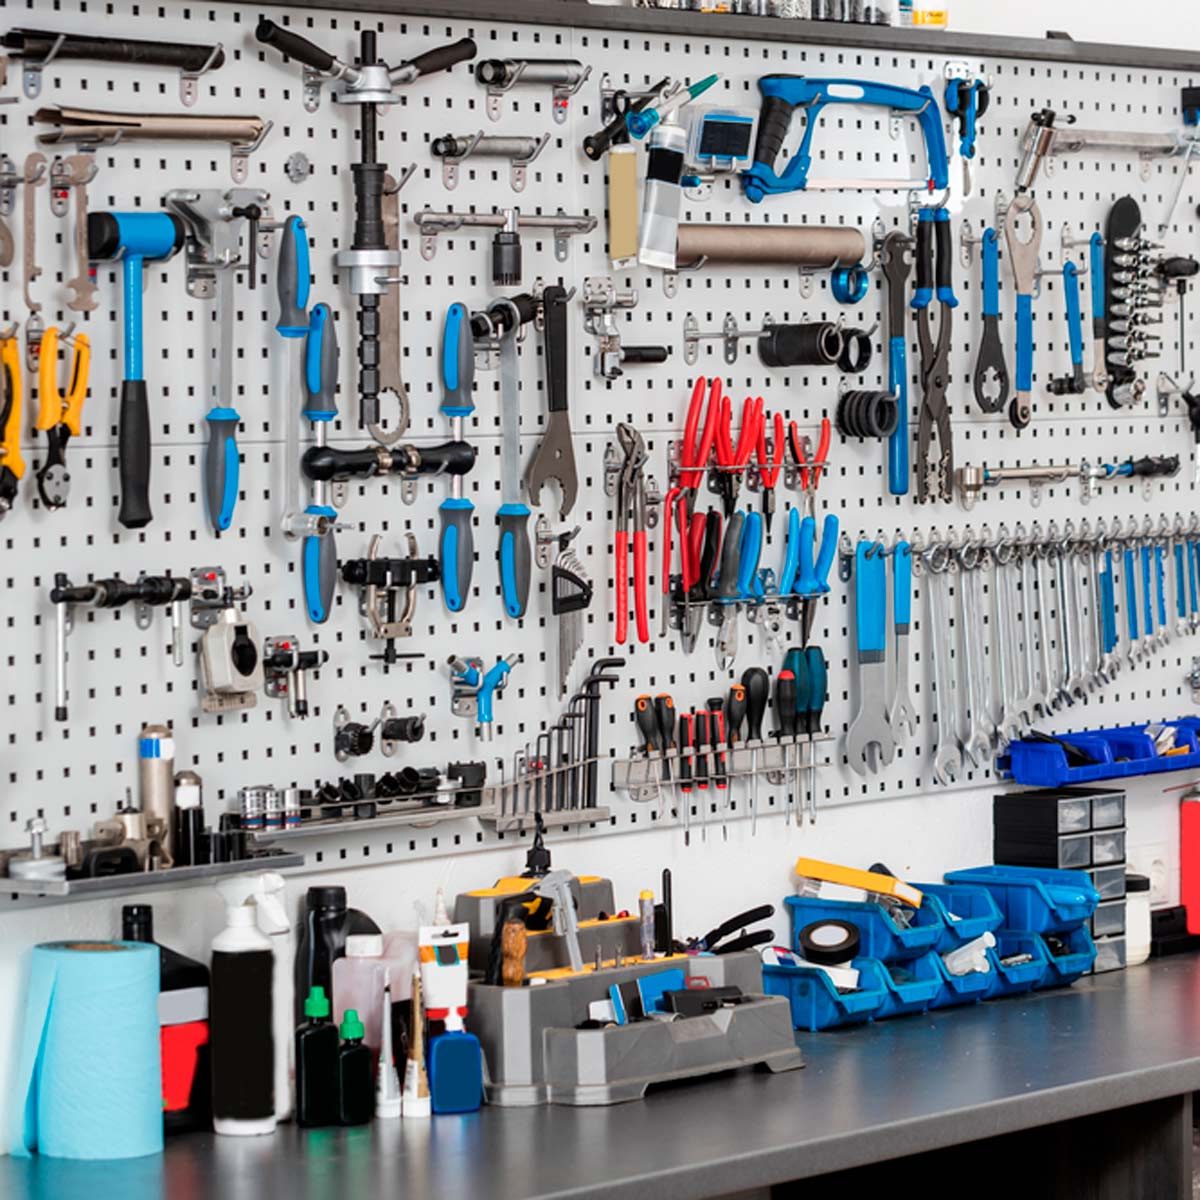 The Top 11 Tips for Creating a Tool Inventory